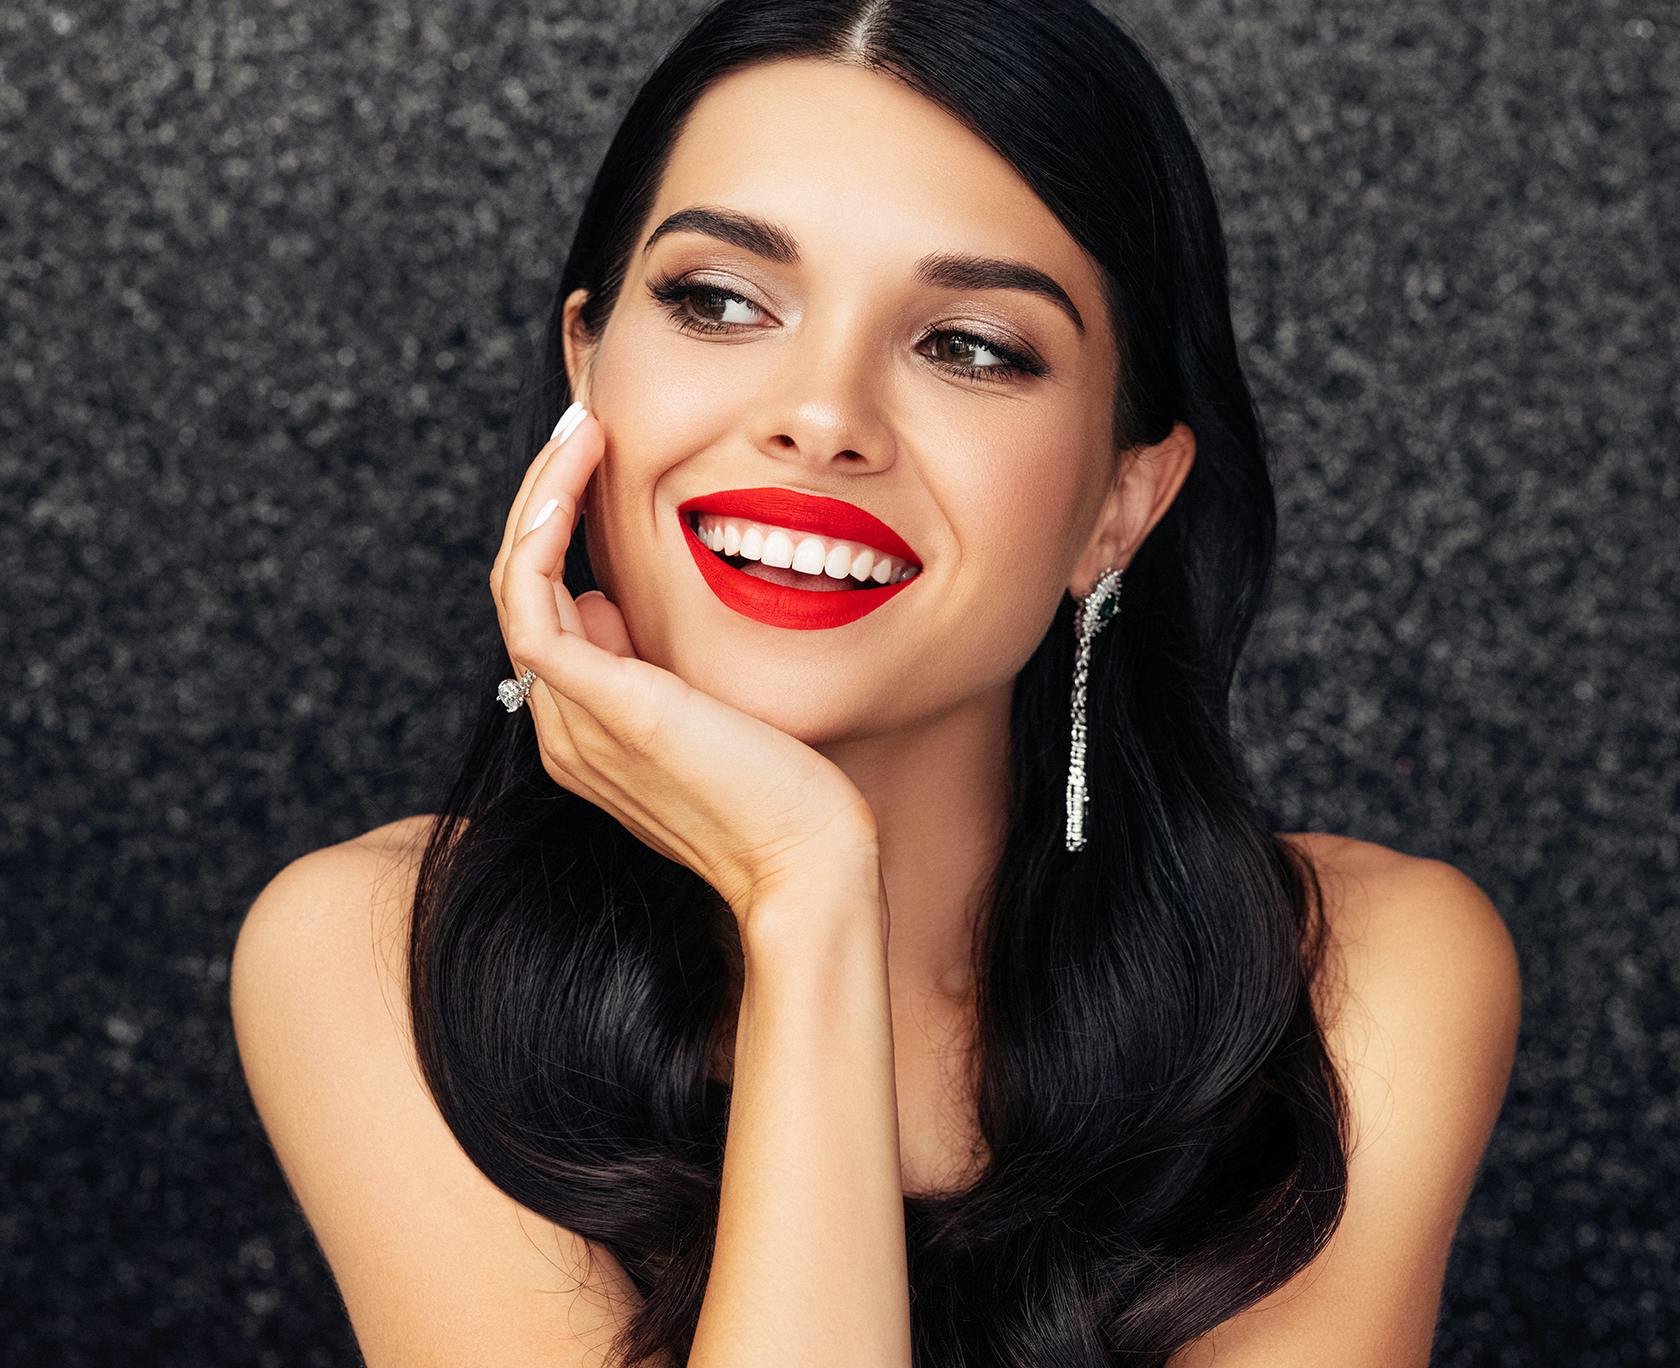 Woman with bright red lipstick and dangly earrings smiling